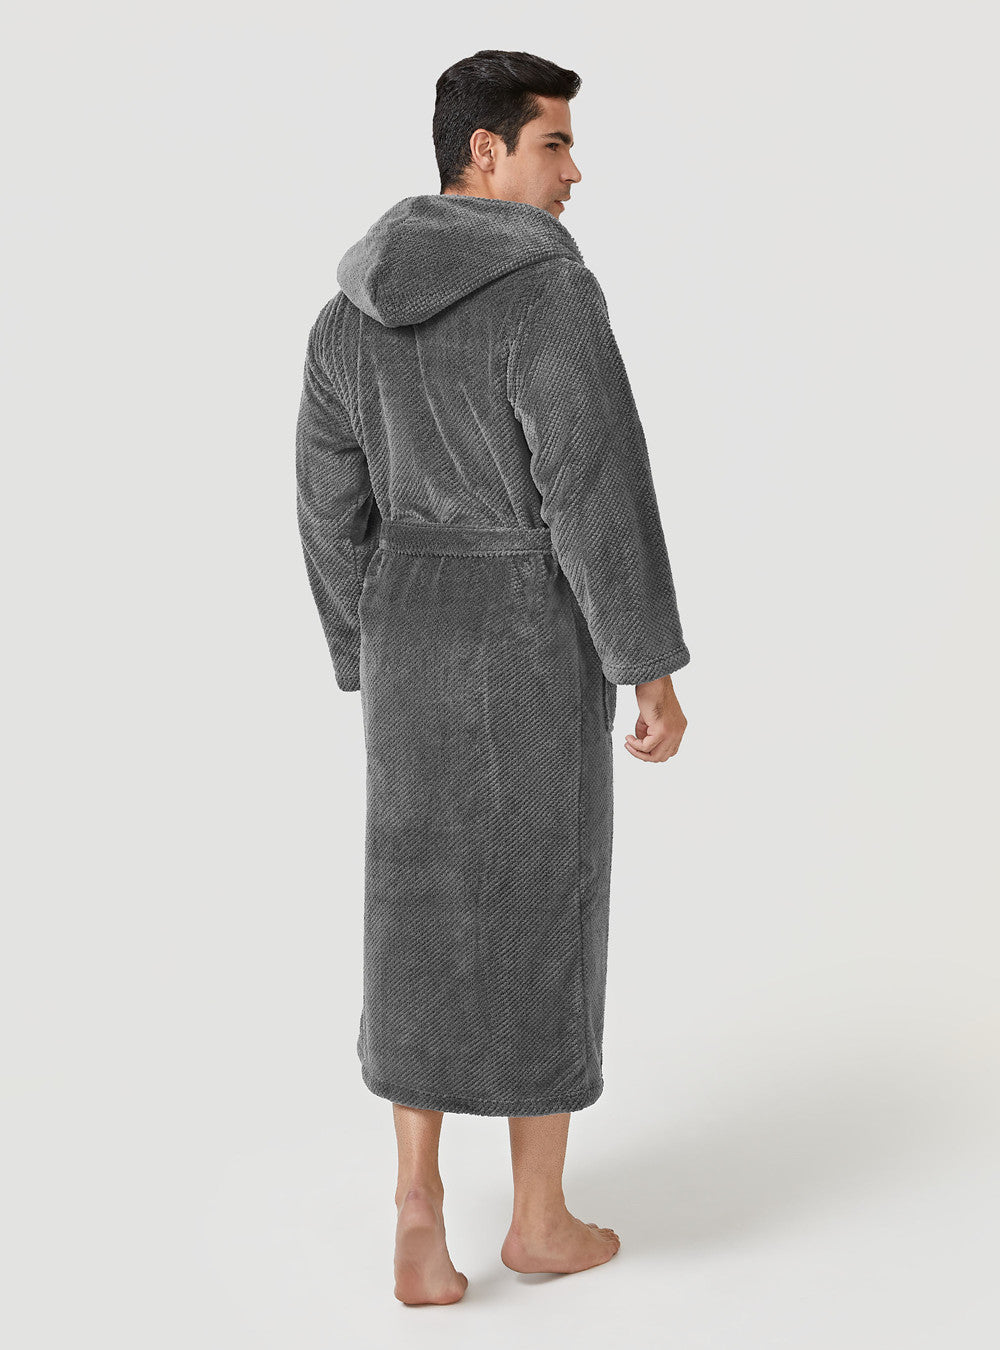 Buy Hooded Sherpa Robe Long Plush Fuzzy Bathrobe for Women with Hood Sherpa  Lined, Grey, One Size Online at Low Prices in India - Amazon.in